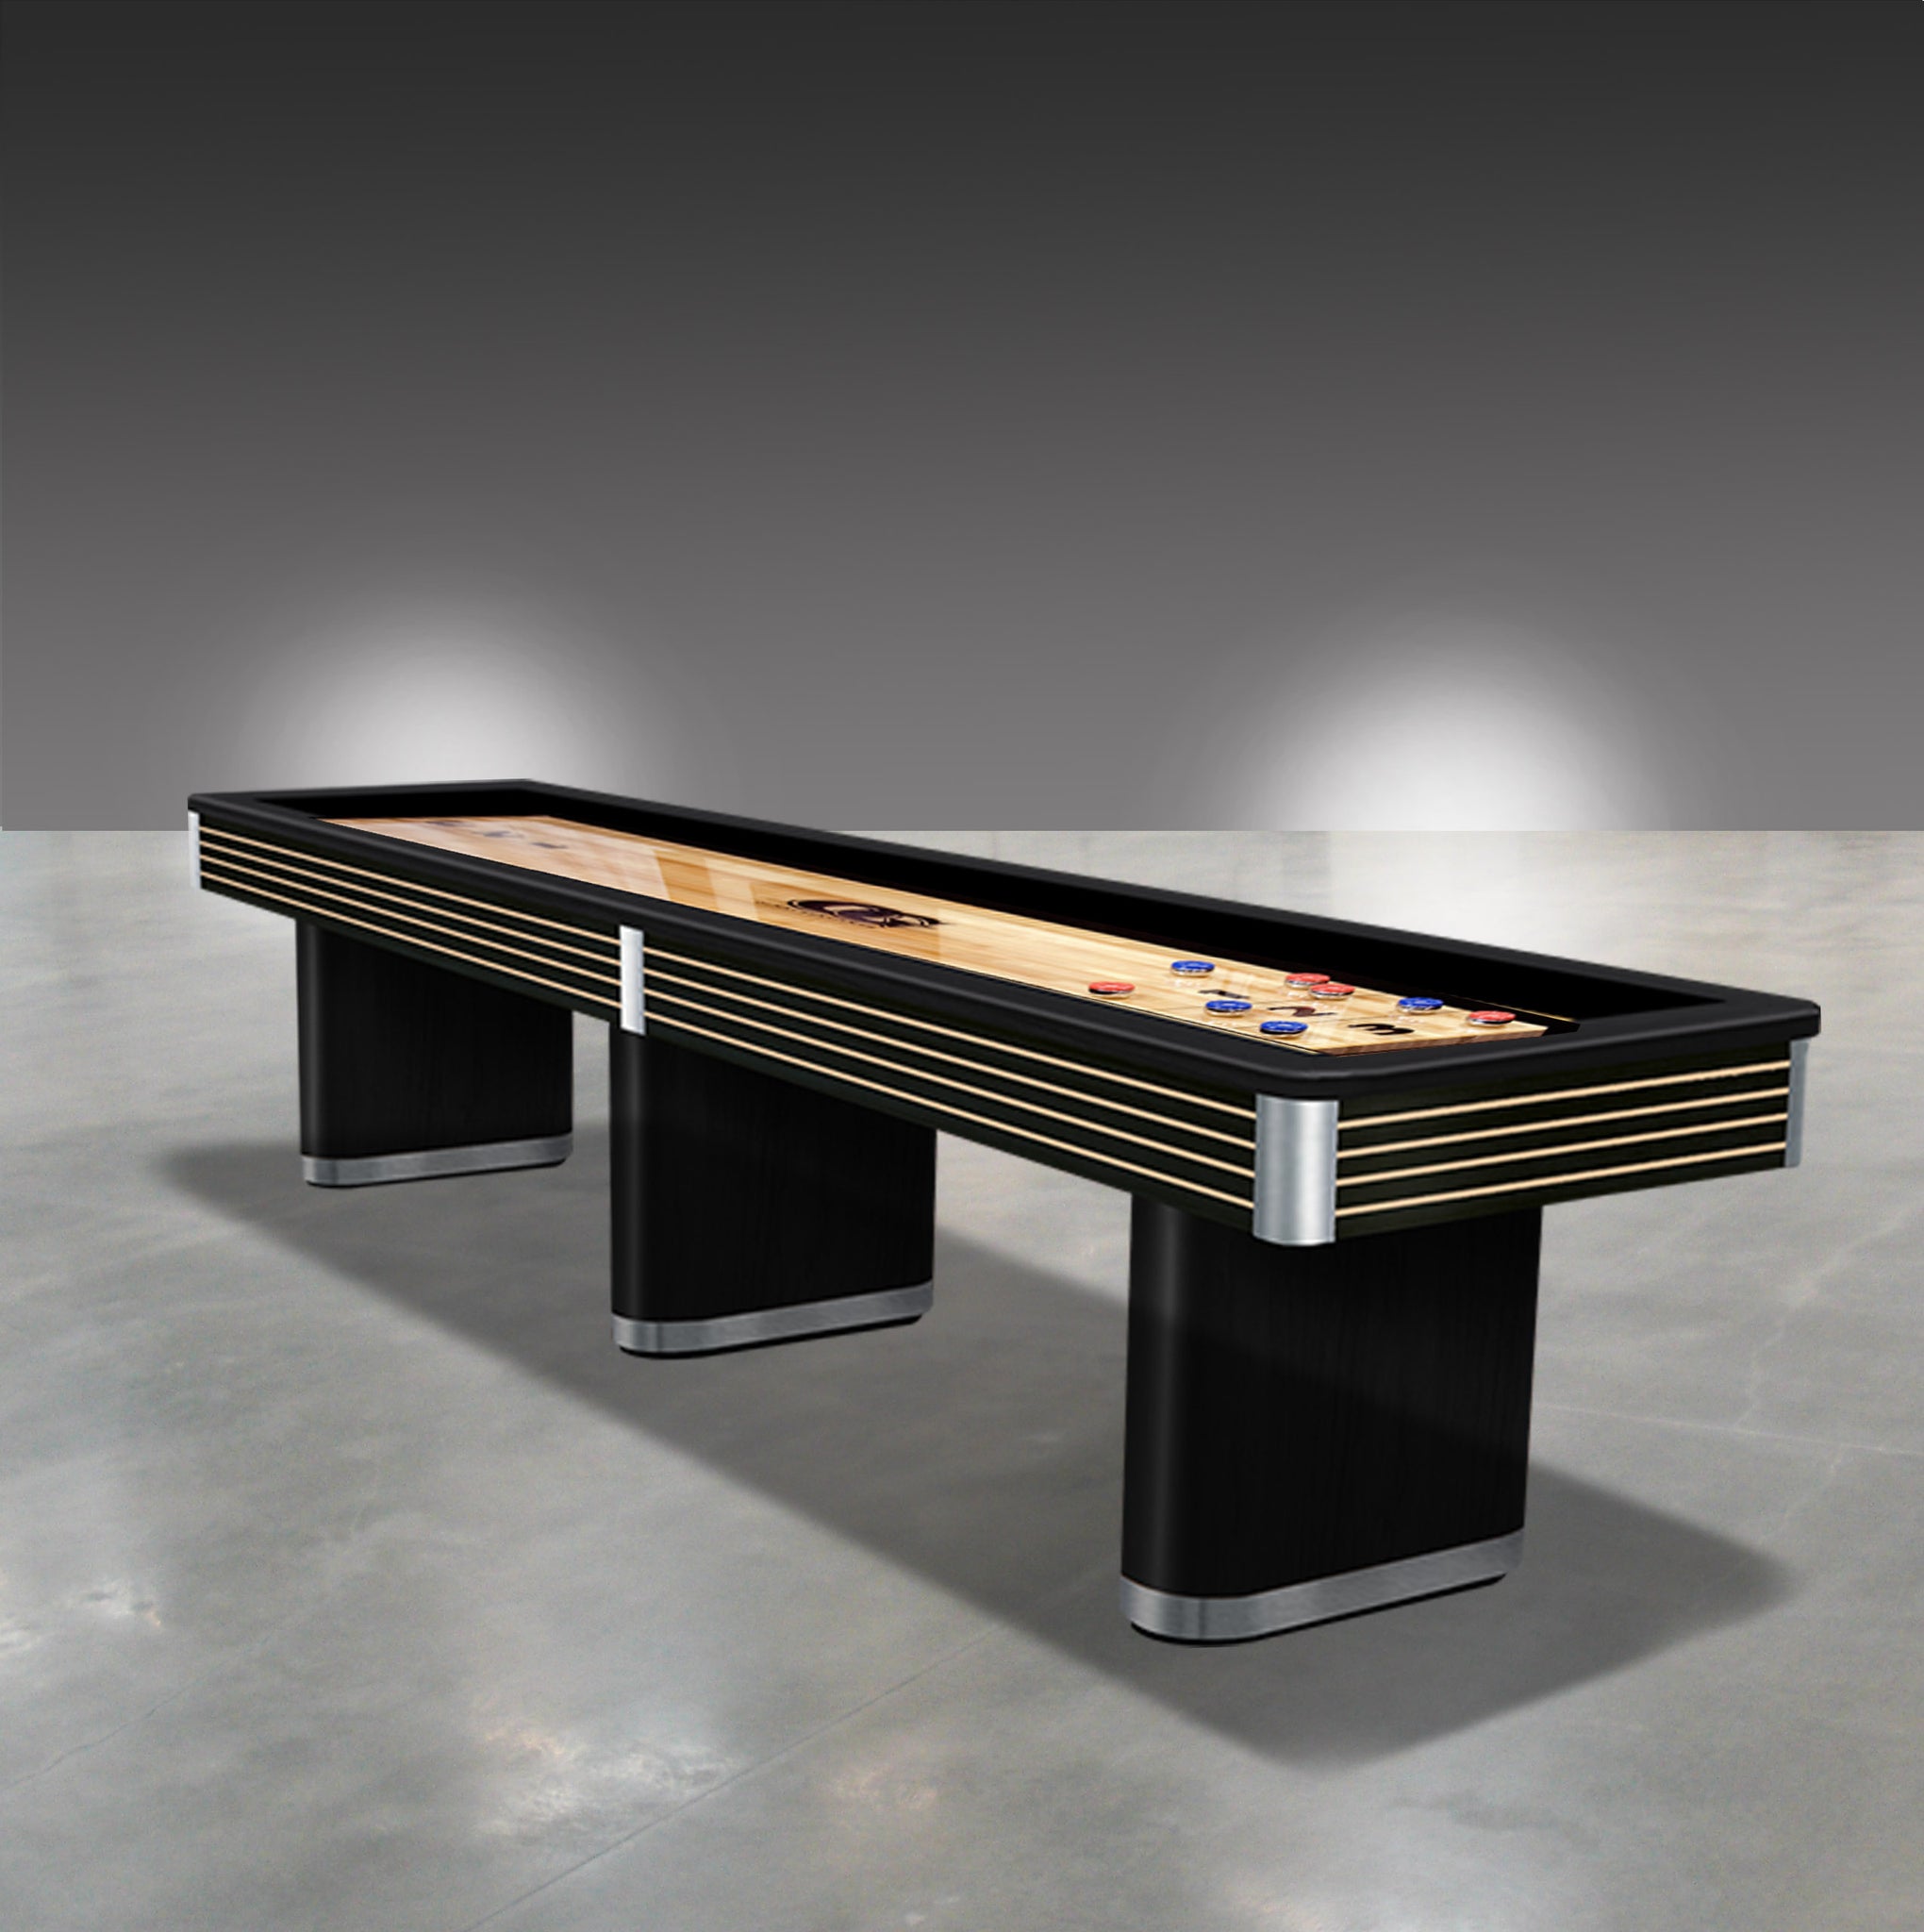 Heritage hand-crafted Shuffleboard by Olhausen